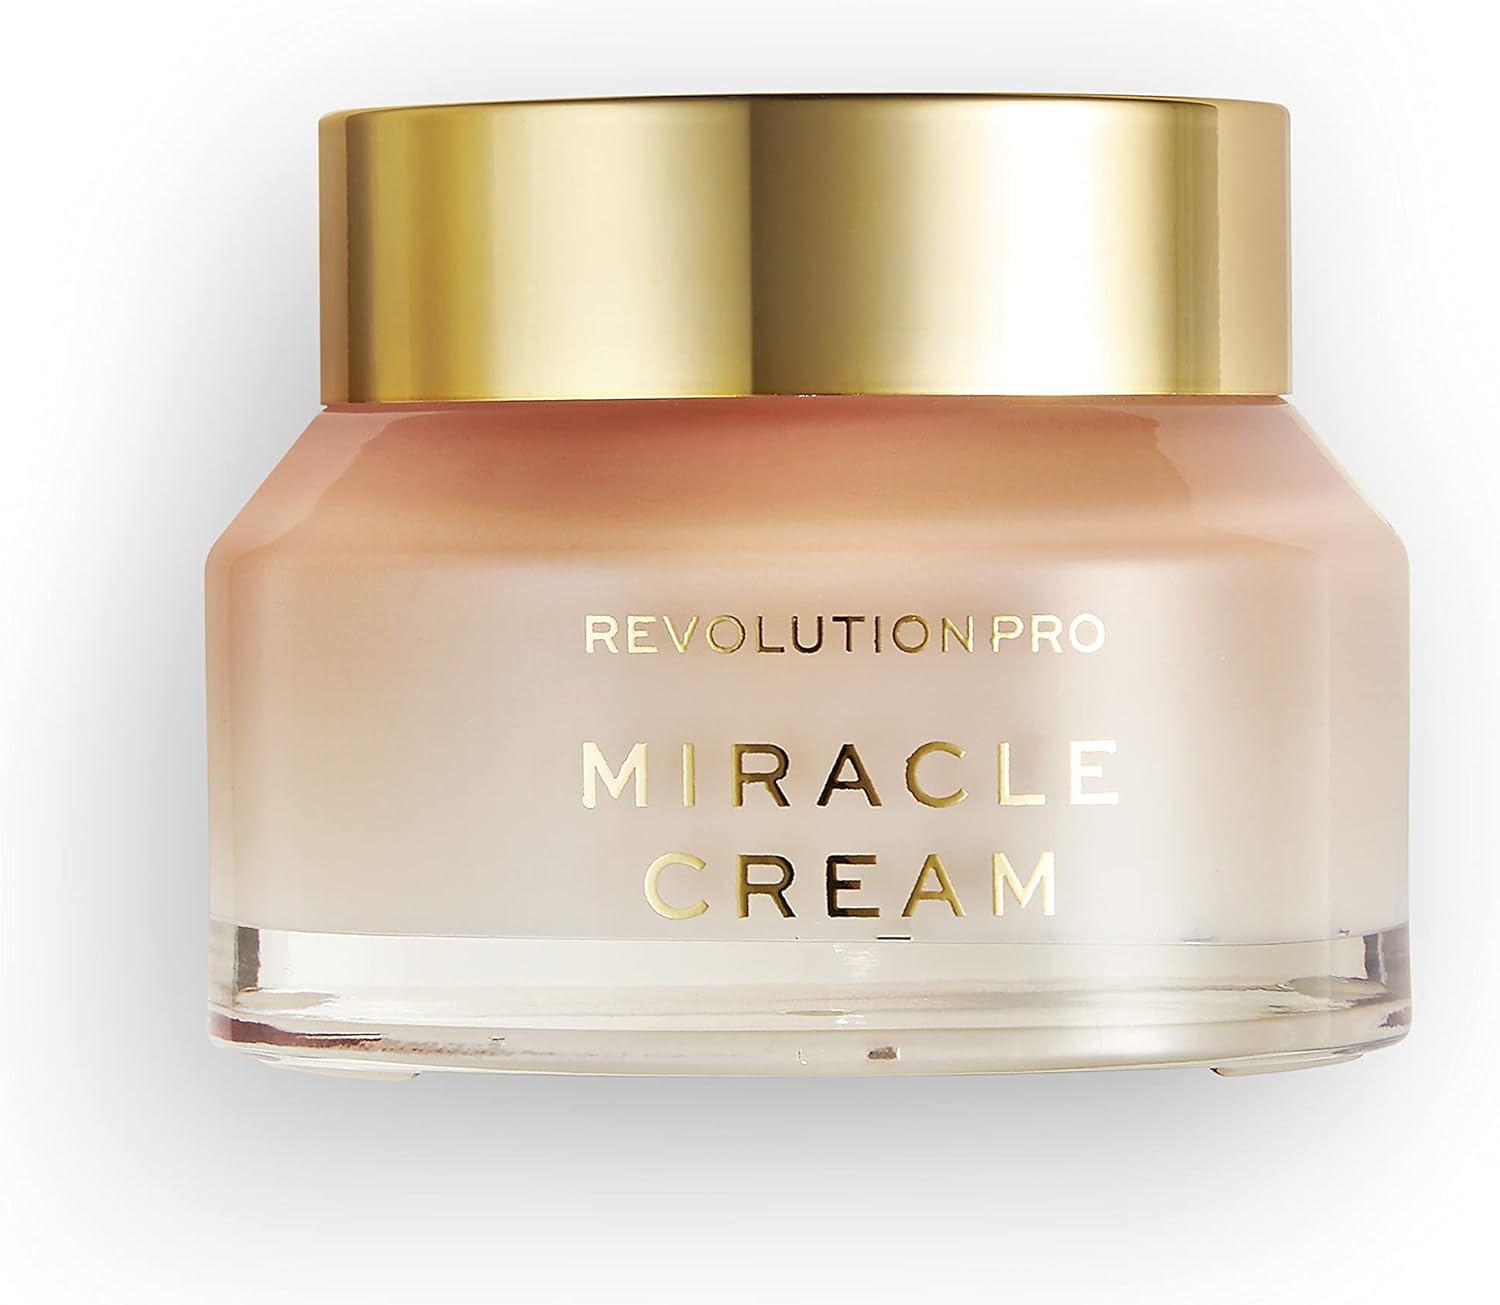 Revolution Pro, Miracle Cream, Hydrating & Beautifying Face Cream, Reduces Dull Complexions, Lightweight Formula, Contains Hyaluronic Acid & Niacinamide, 50 ml